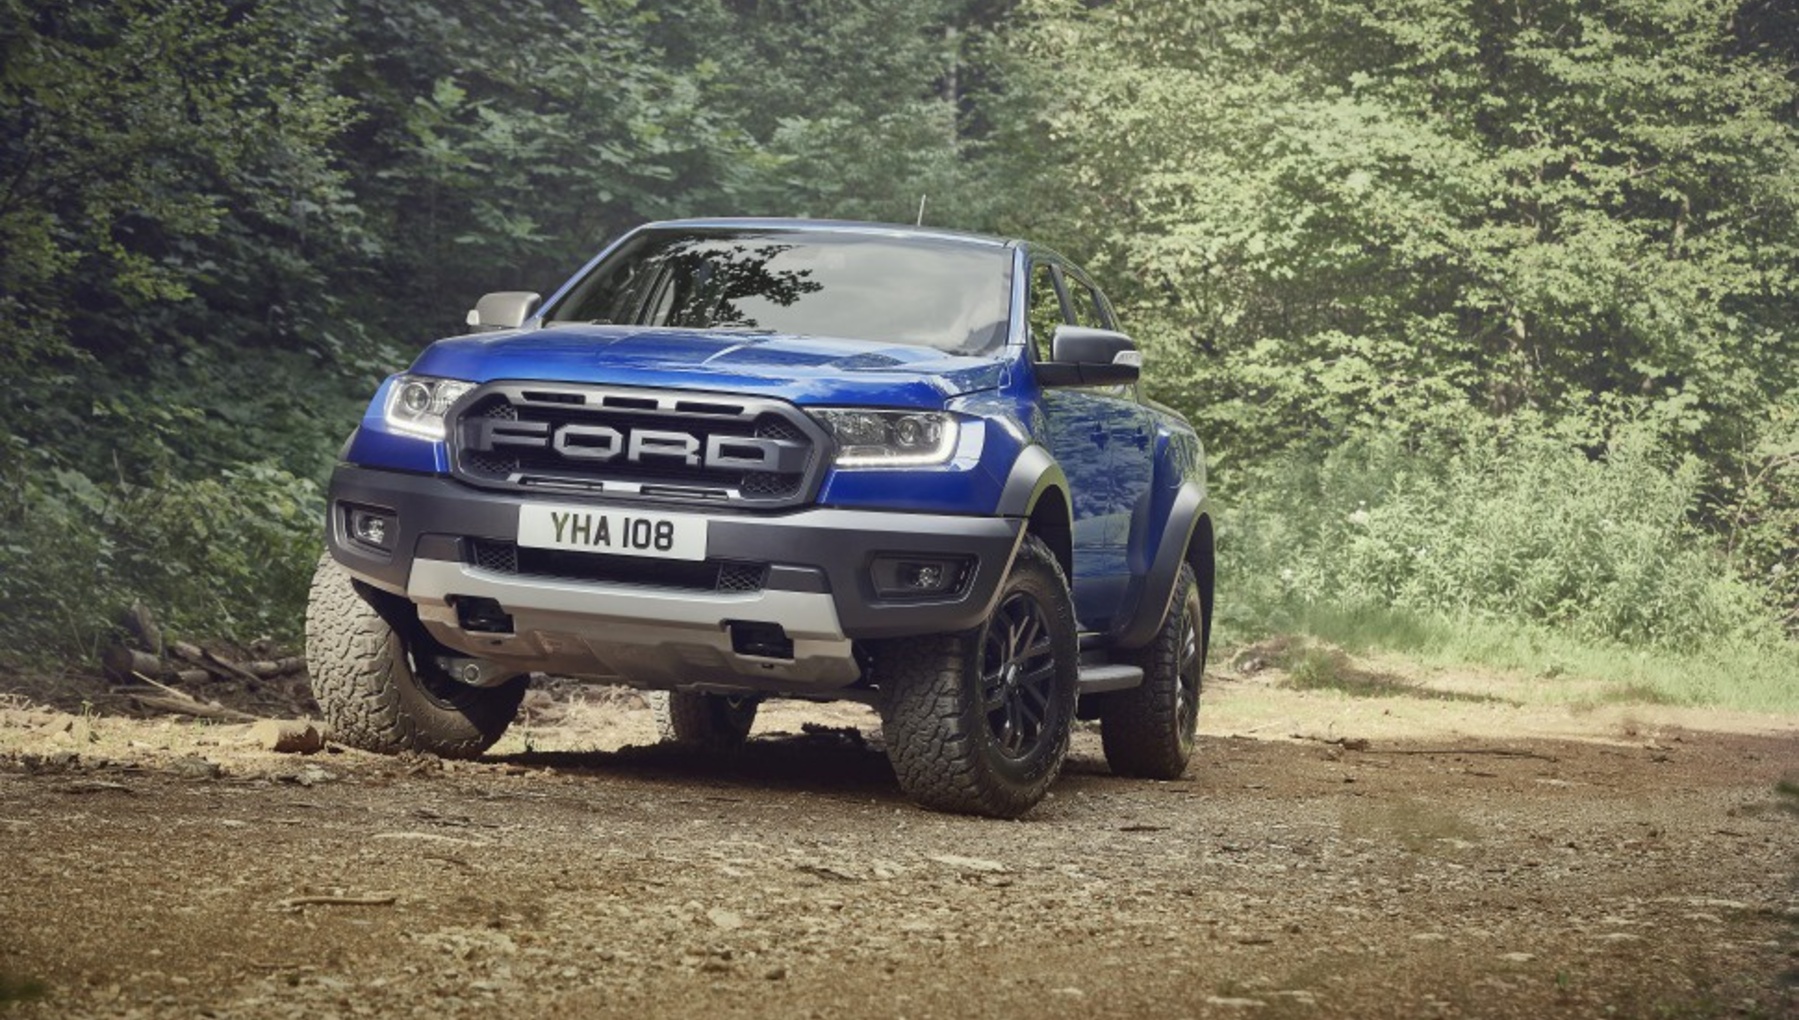 Ford Ranger IV SuperCrew (Americas) Raptor 2.0d (214 Hp) Automatic 2019, 2020, 2021, 2022 